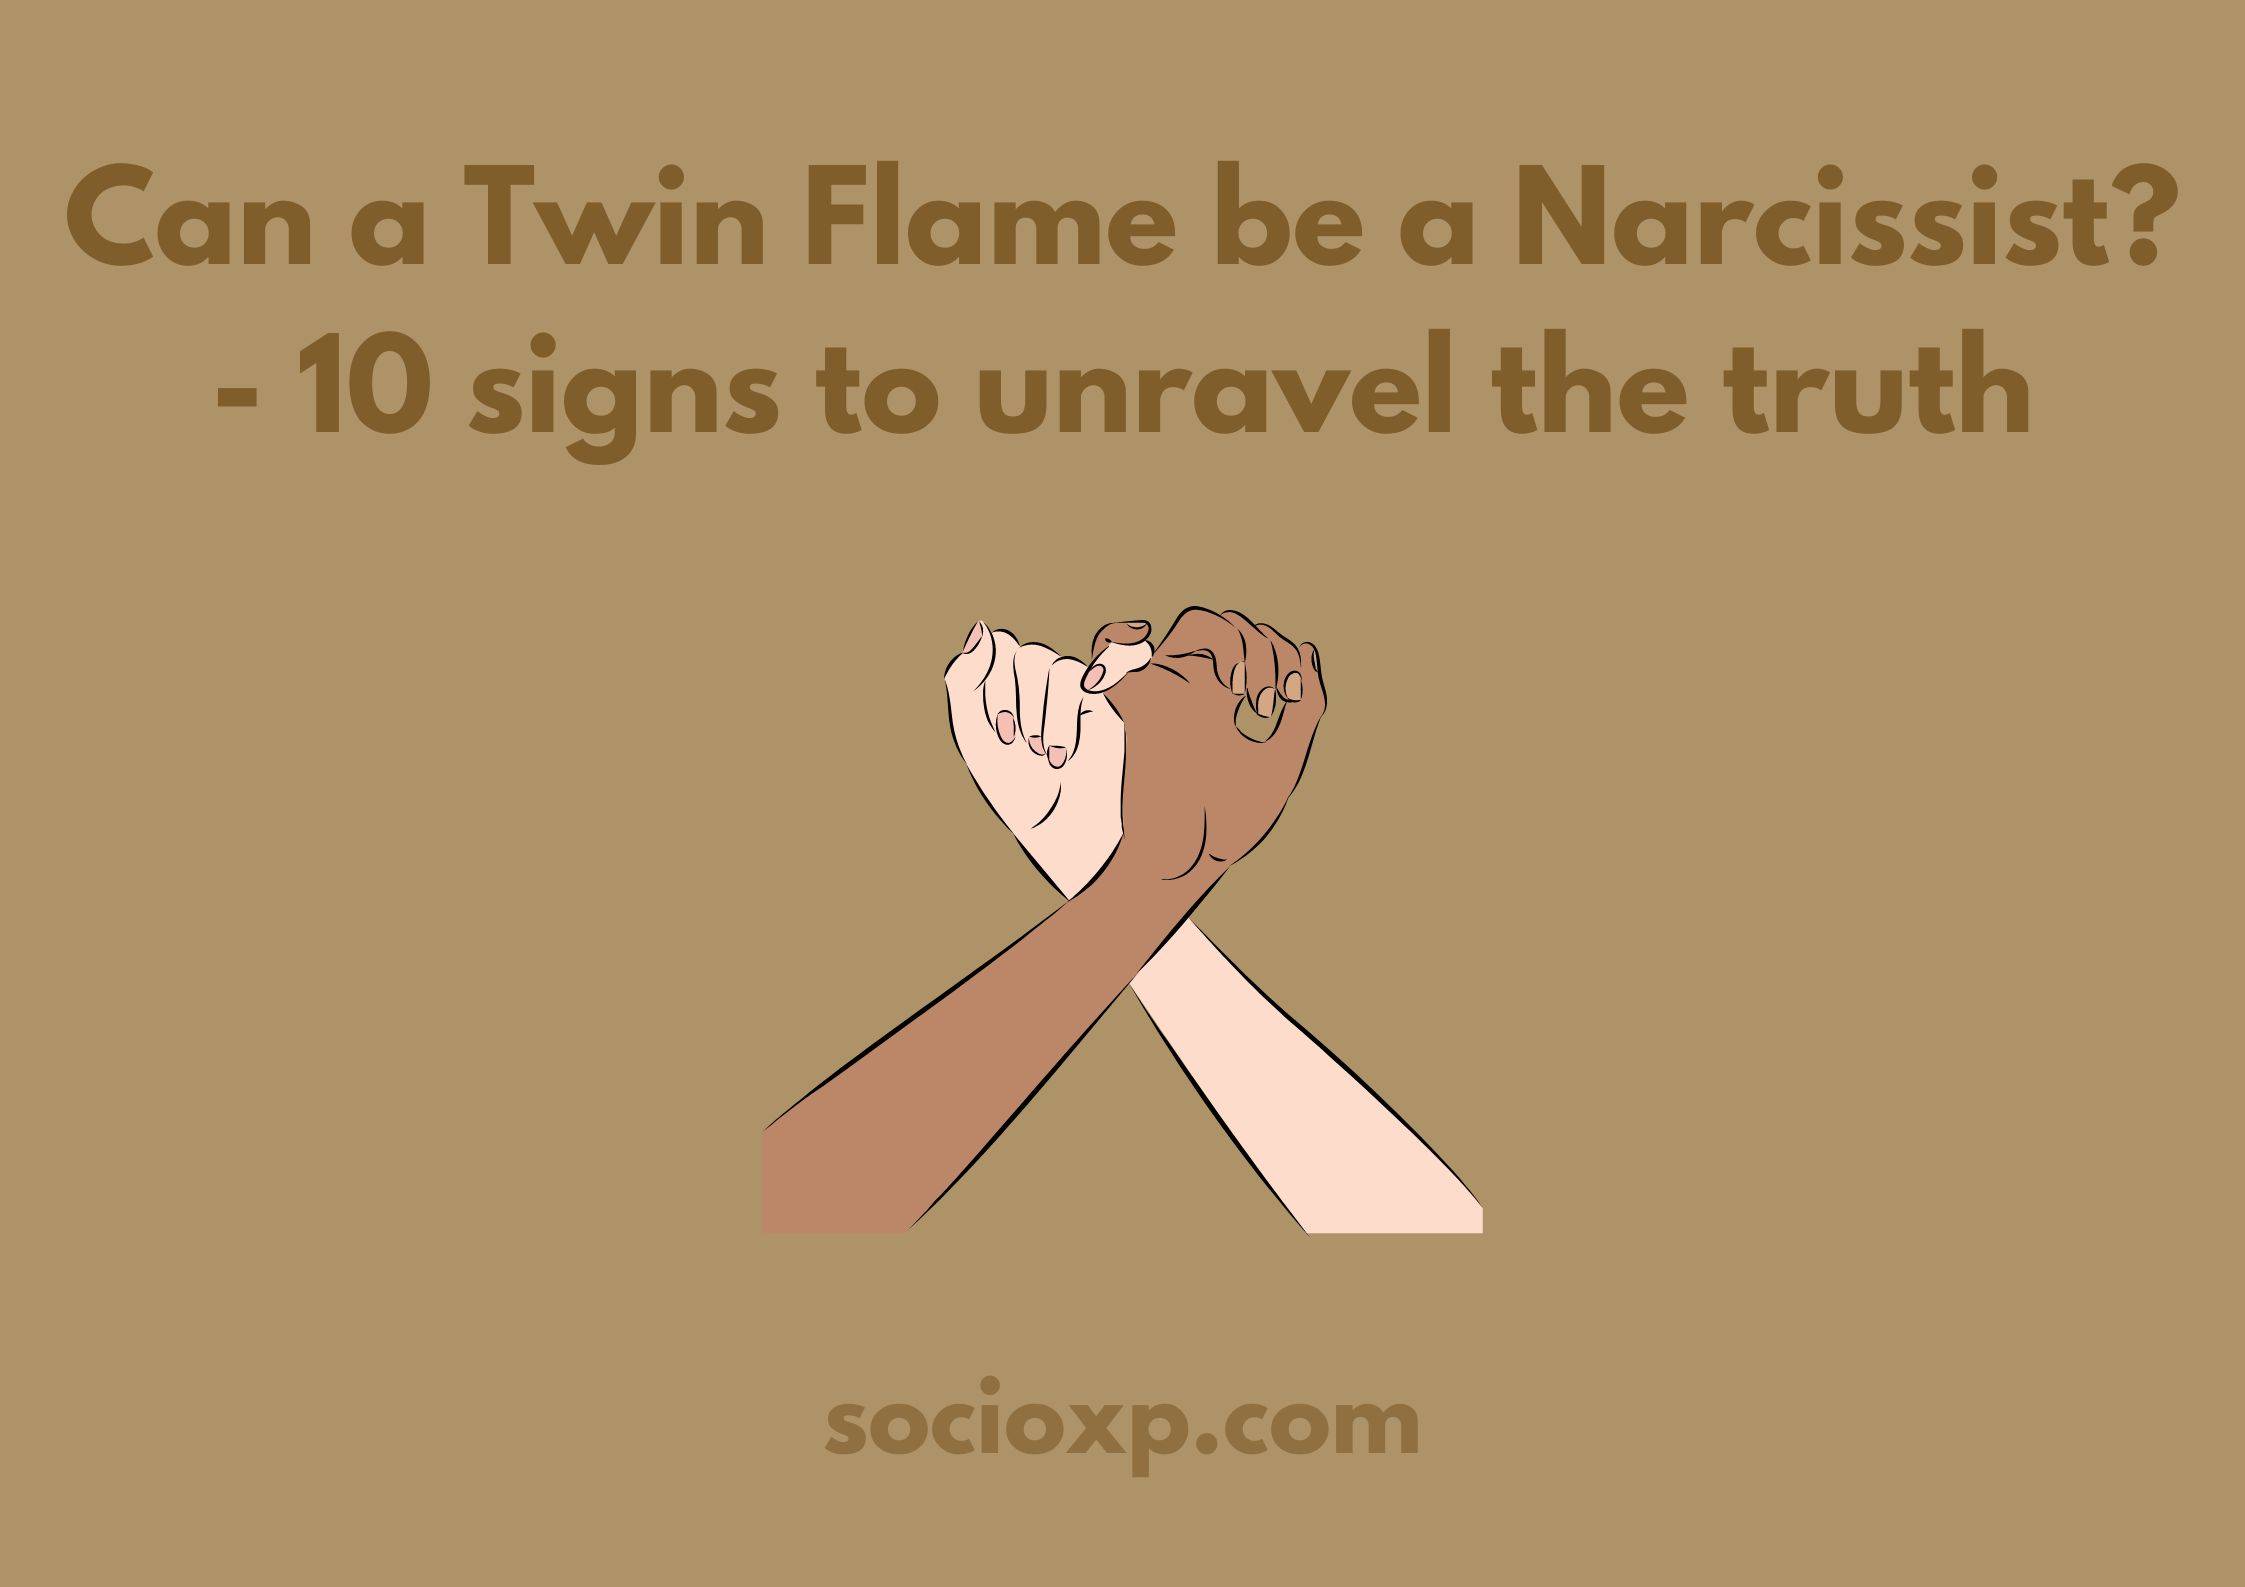 Can a Twin Flame be a Narcissist? - 10 signs to unravel the truth